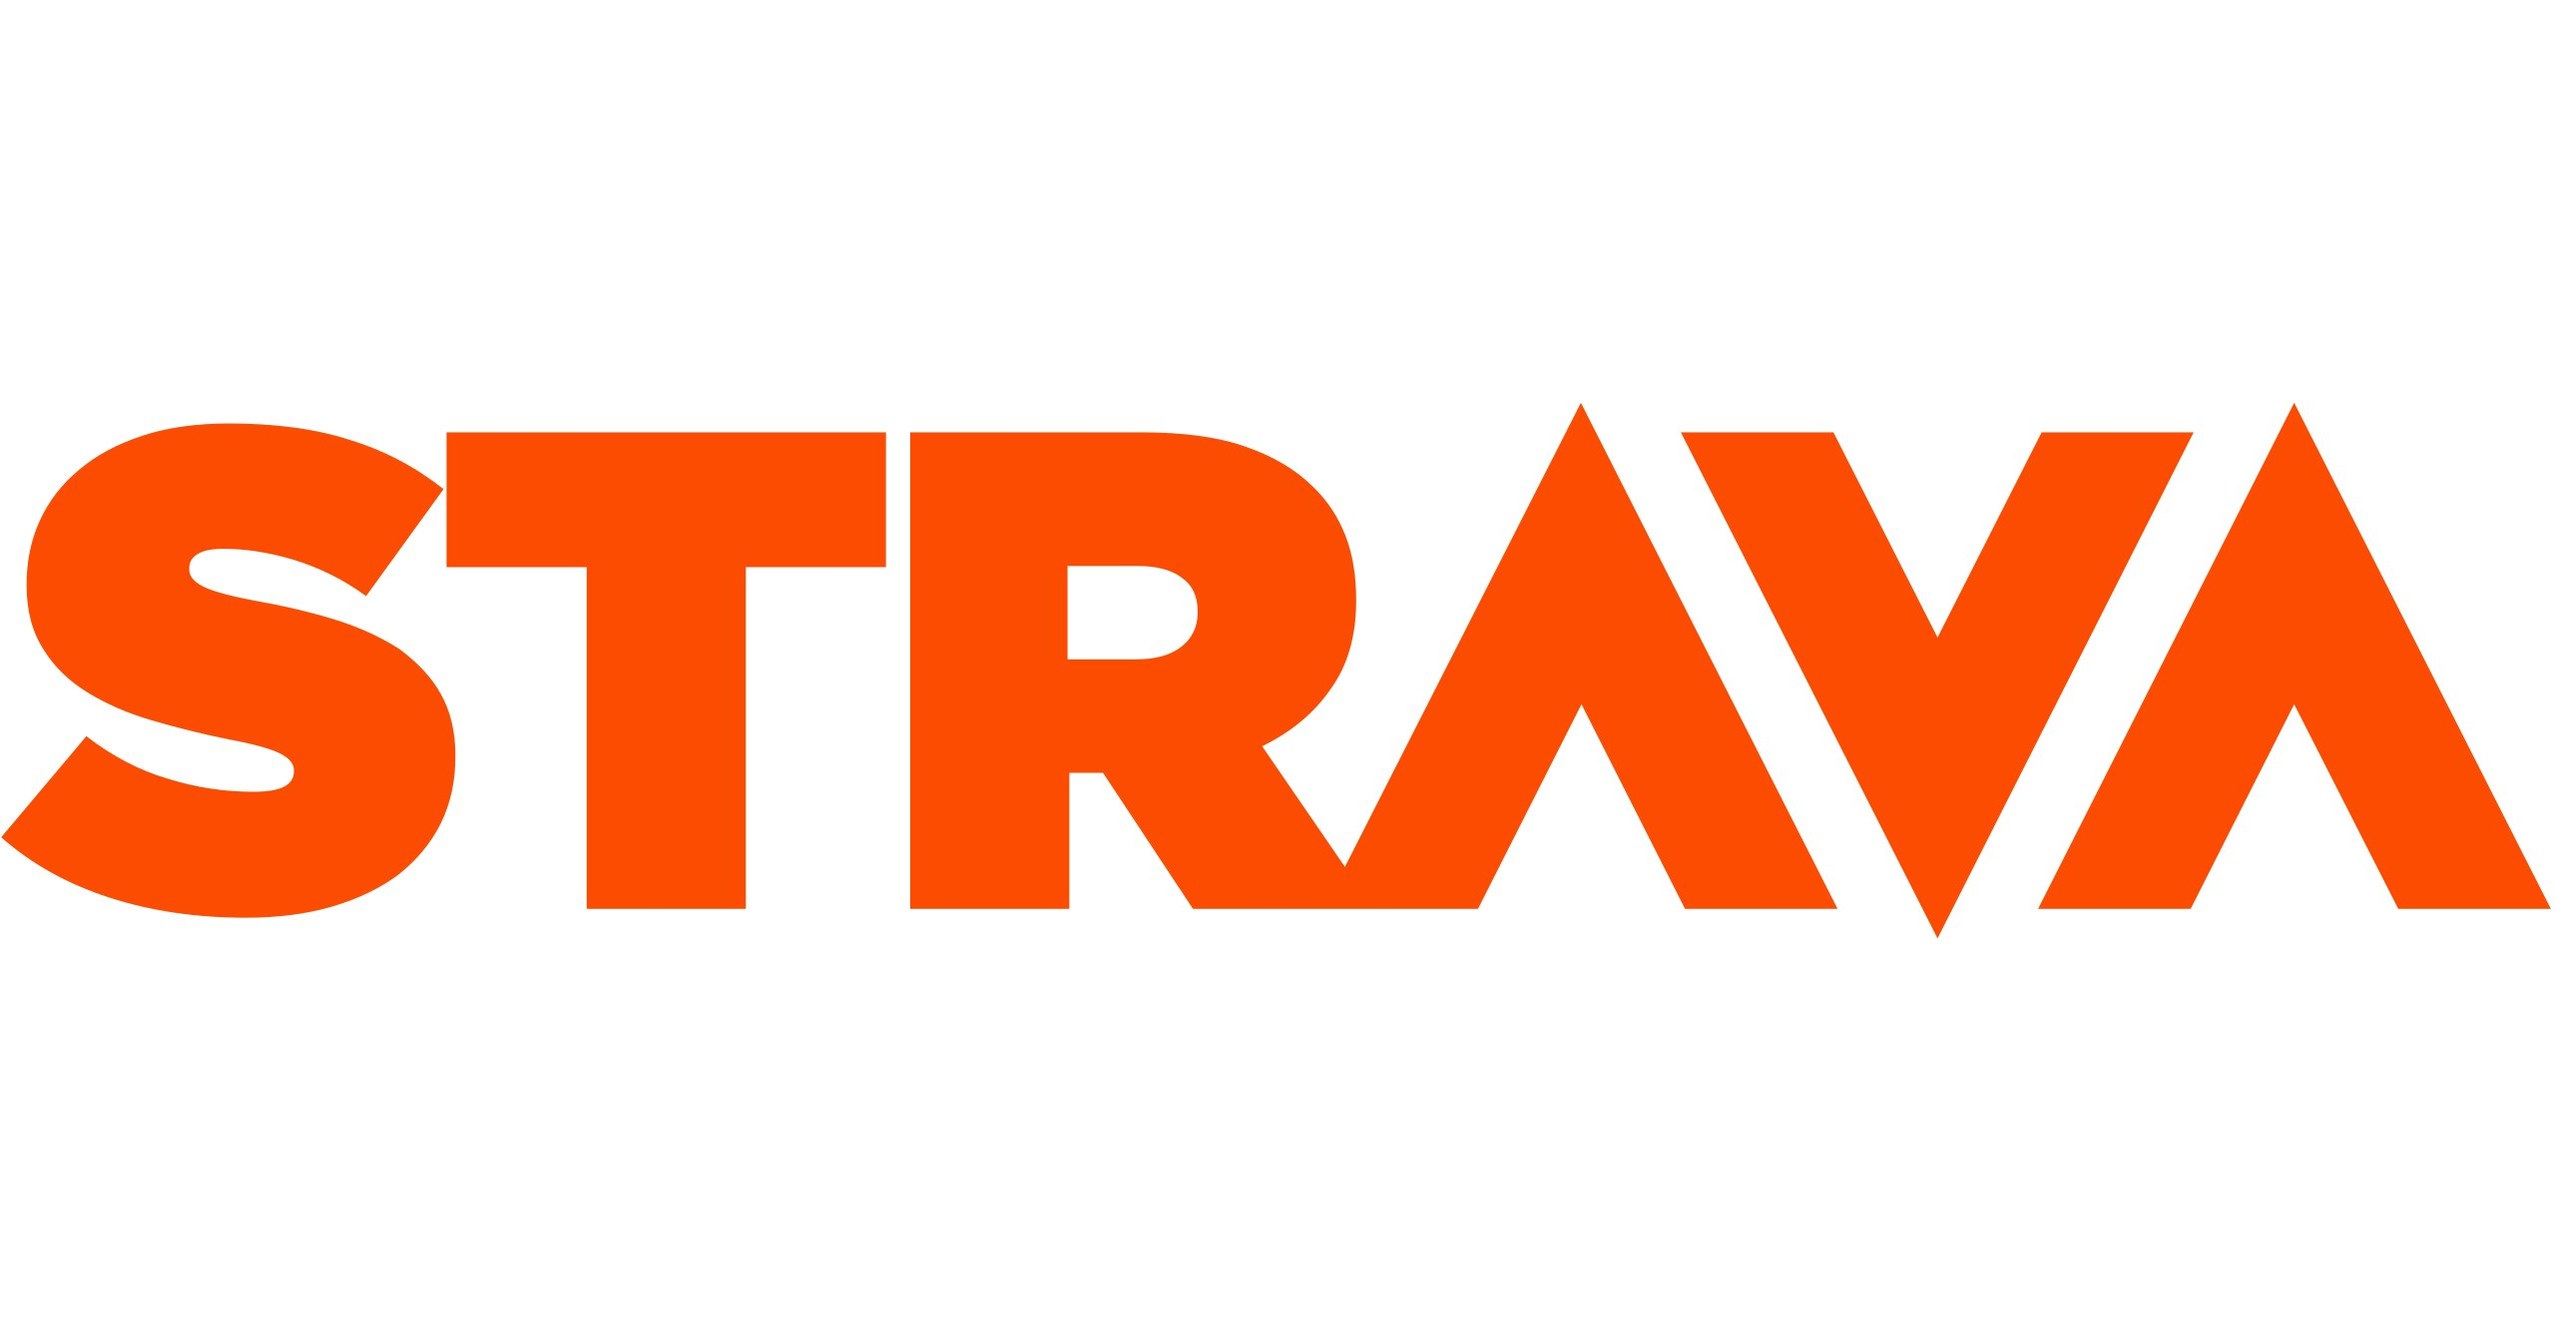 Strava Releases Year In Sport Report, Showing Benefits of Community and Booming Popularity of International Travel Post-Pandemic